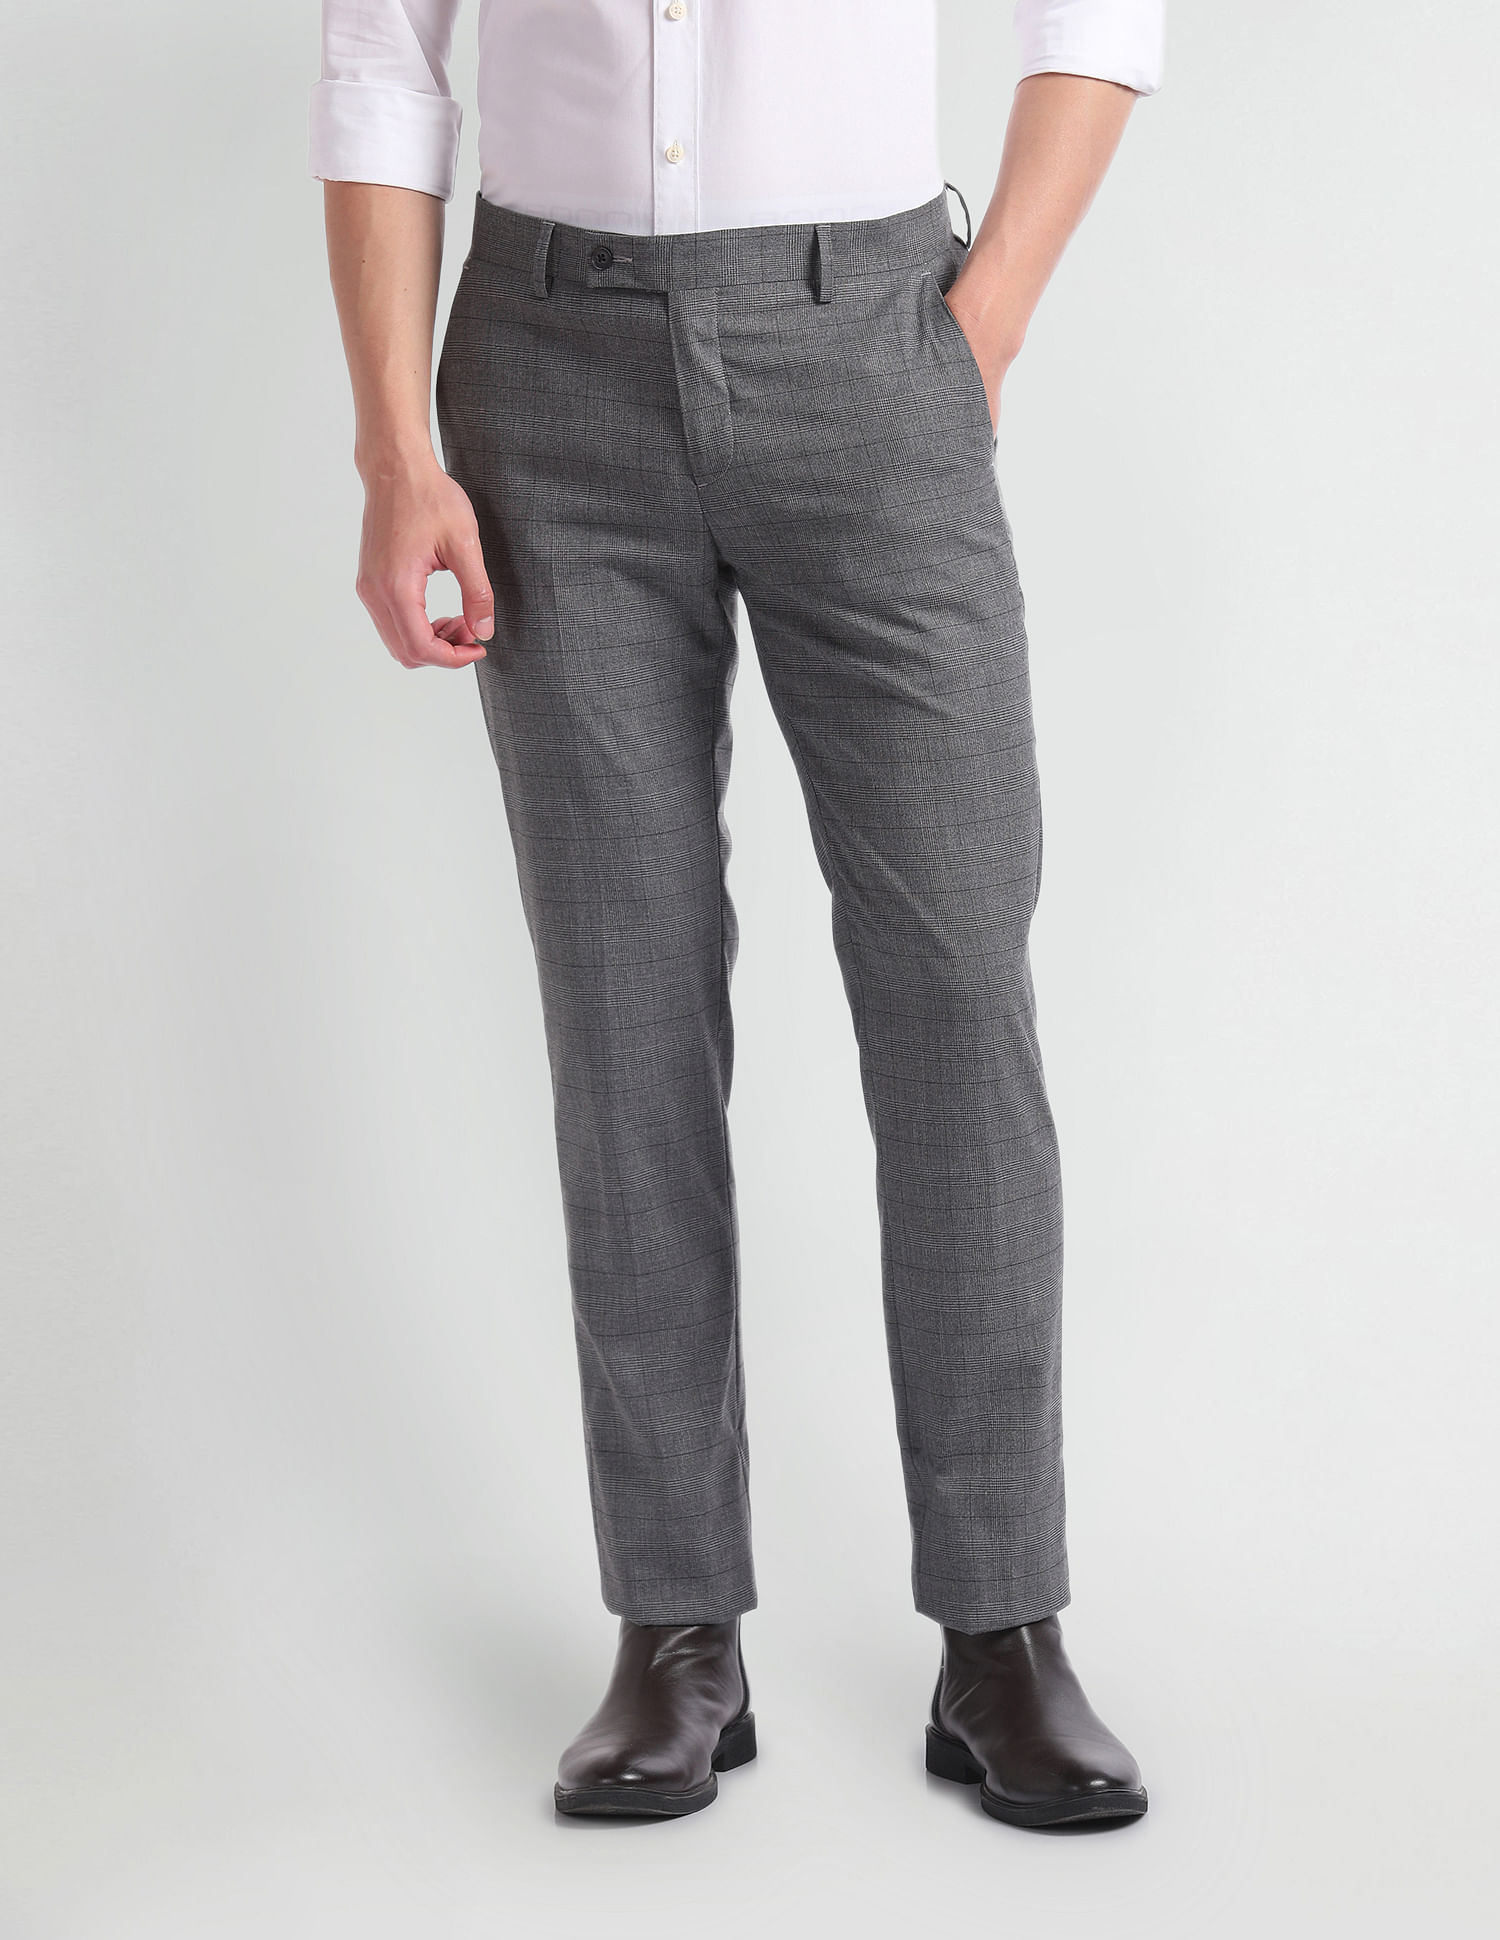 Buy Arrow Patterned Weave Ankle Length Formal Trousers - NNNOW.com